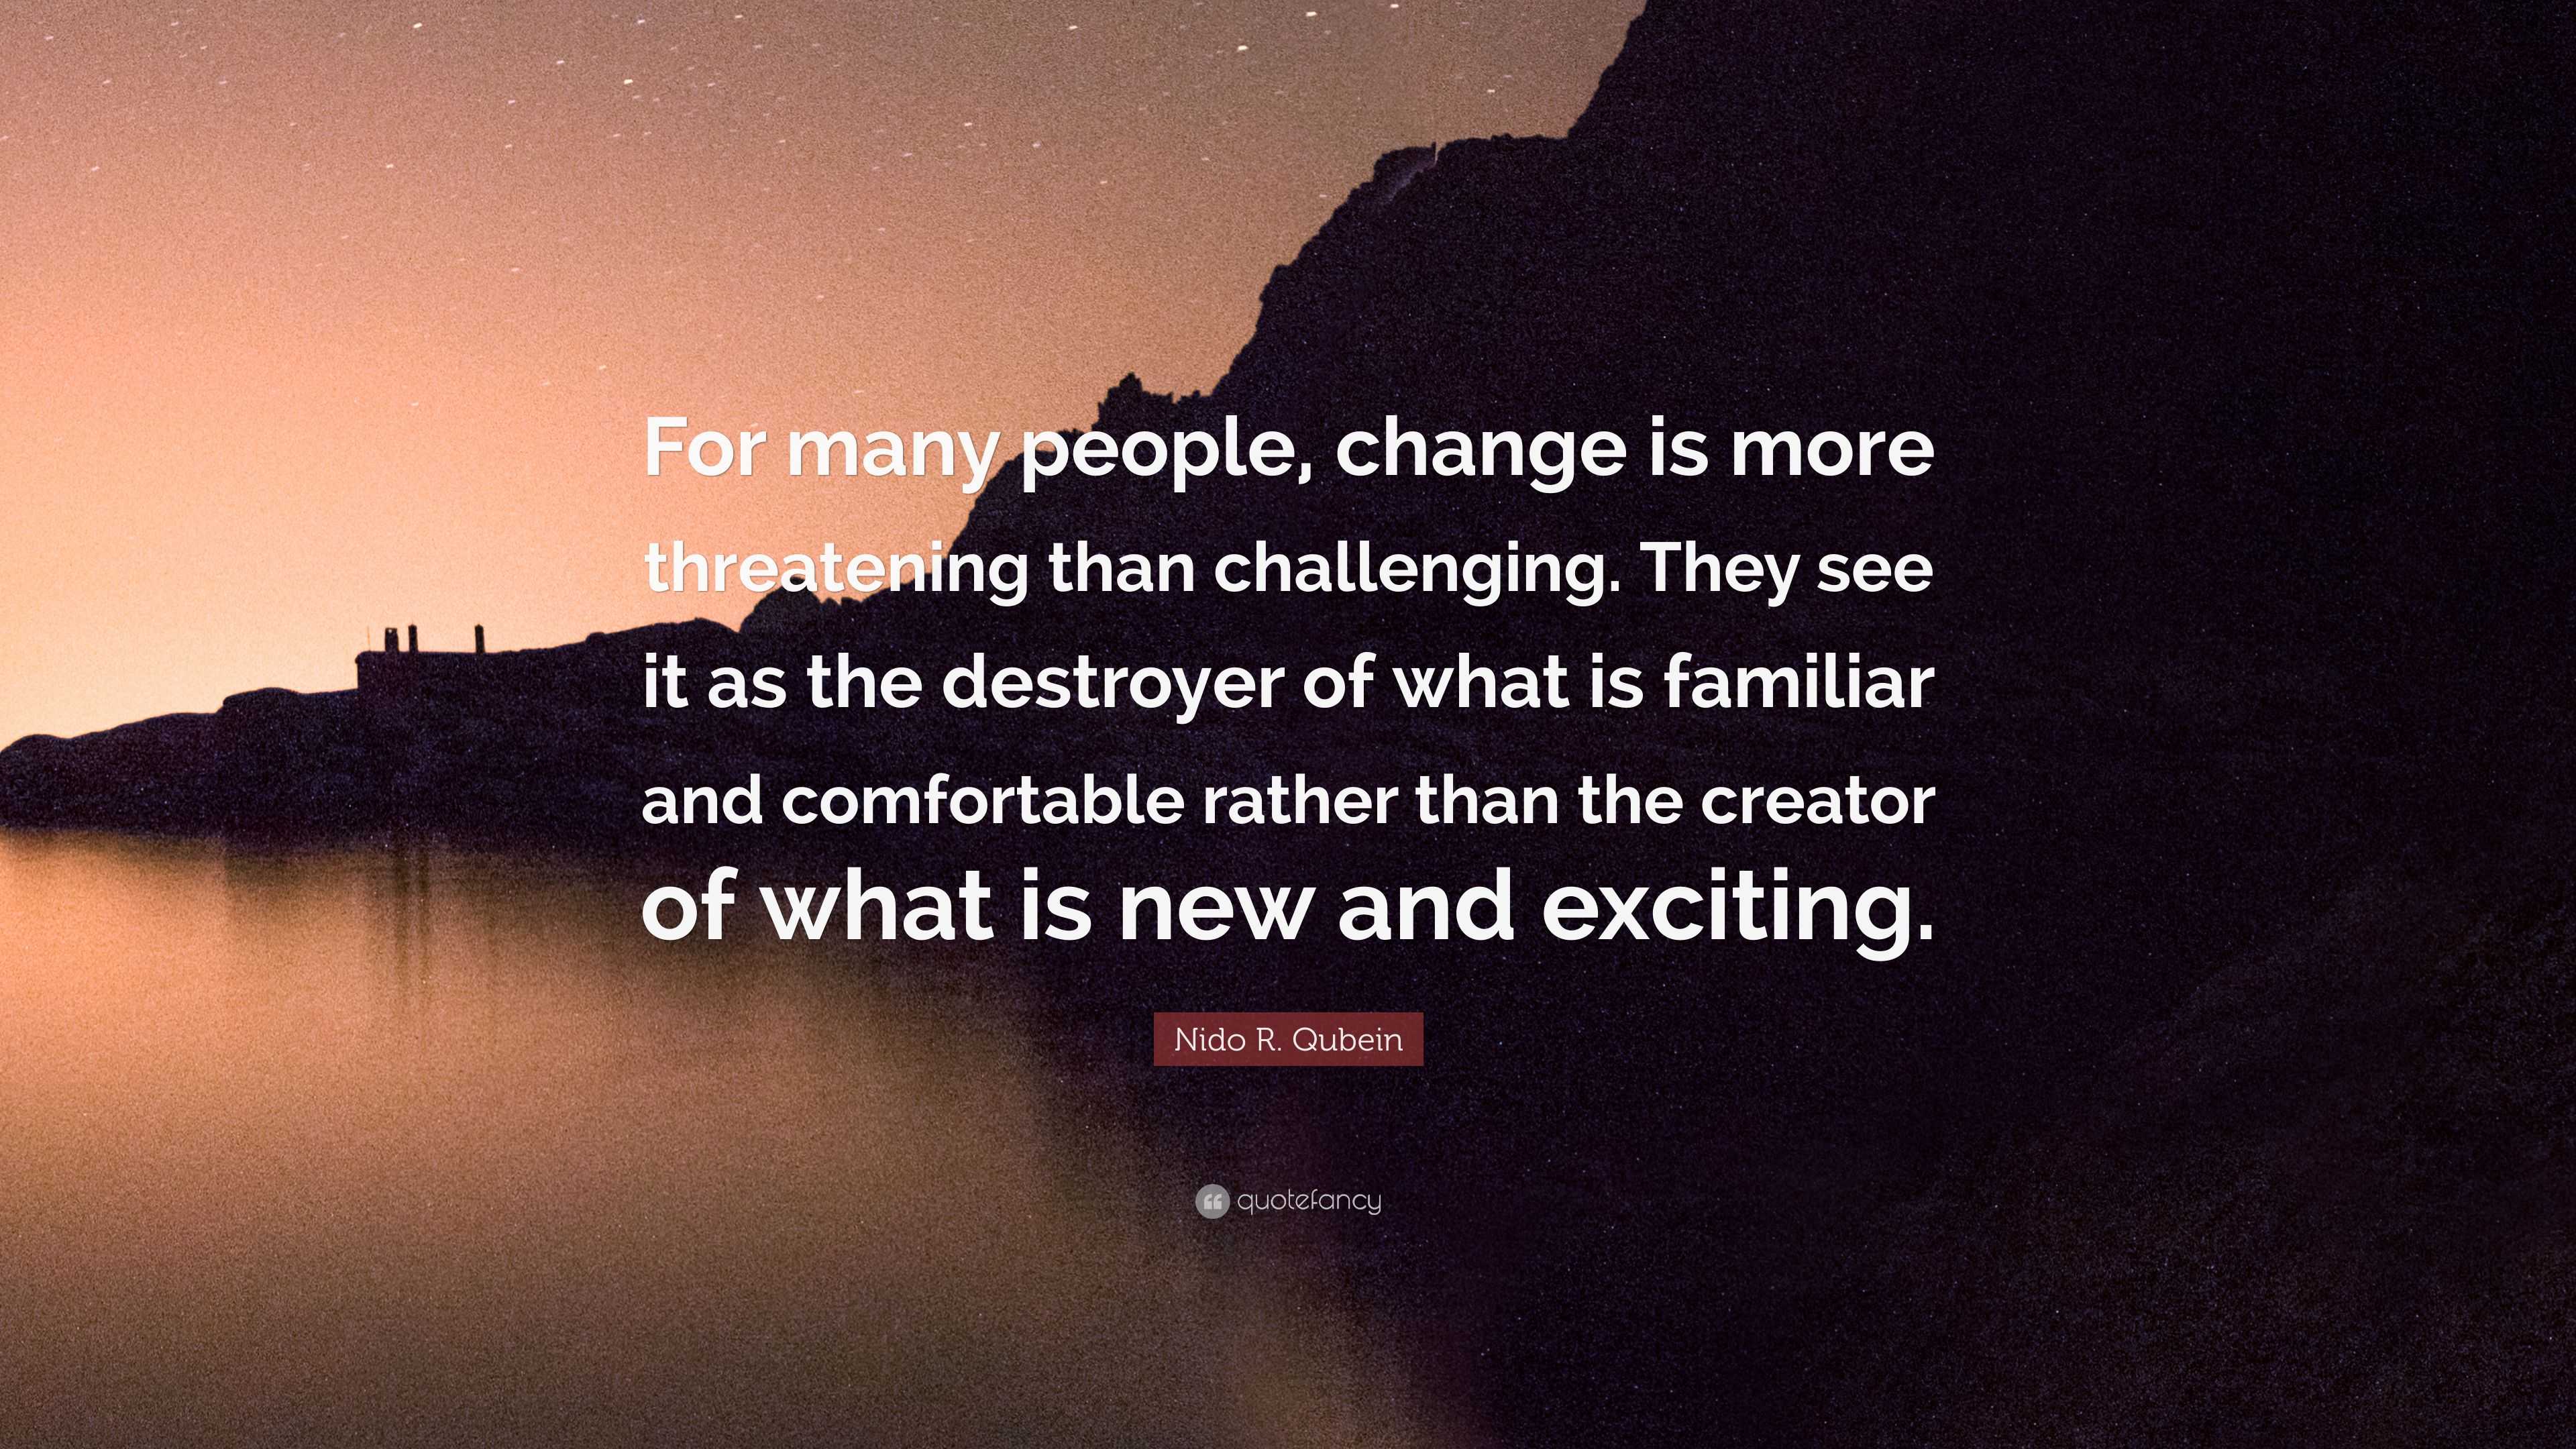 Nido R. Qubein Quote: “For many people, change is more threatening than ...